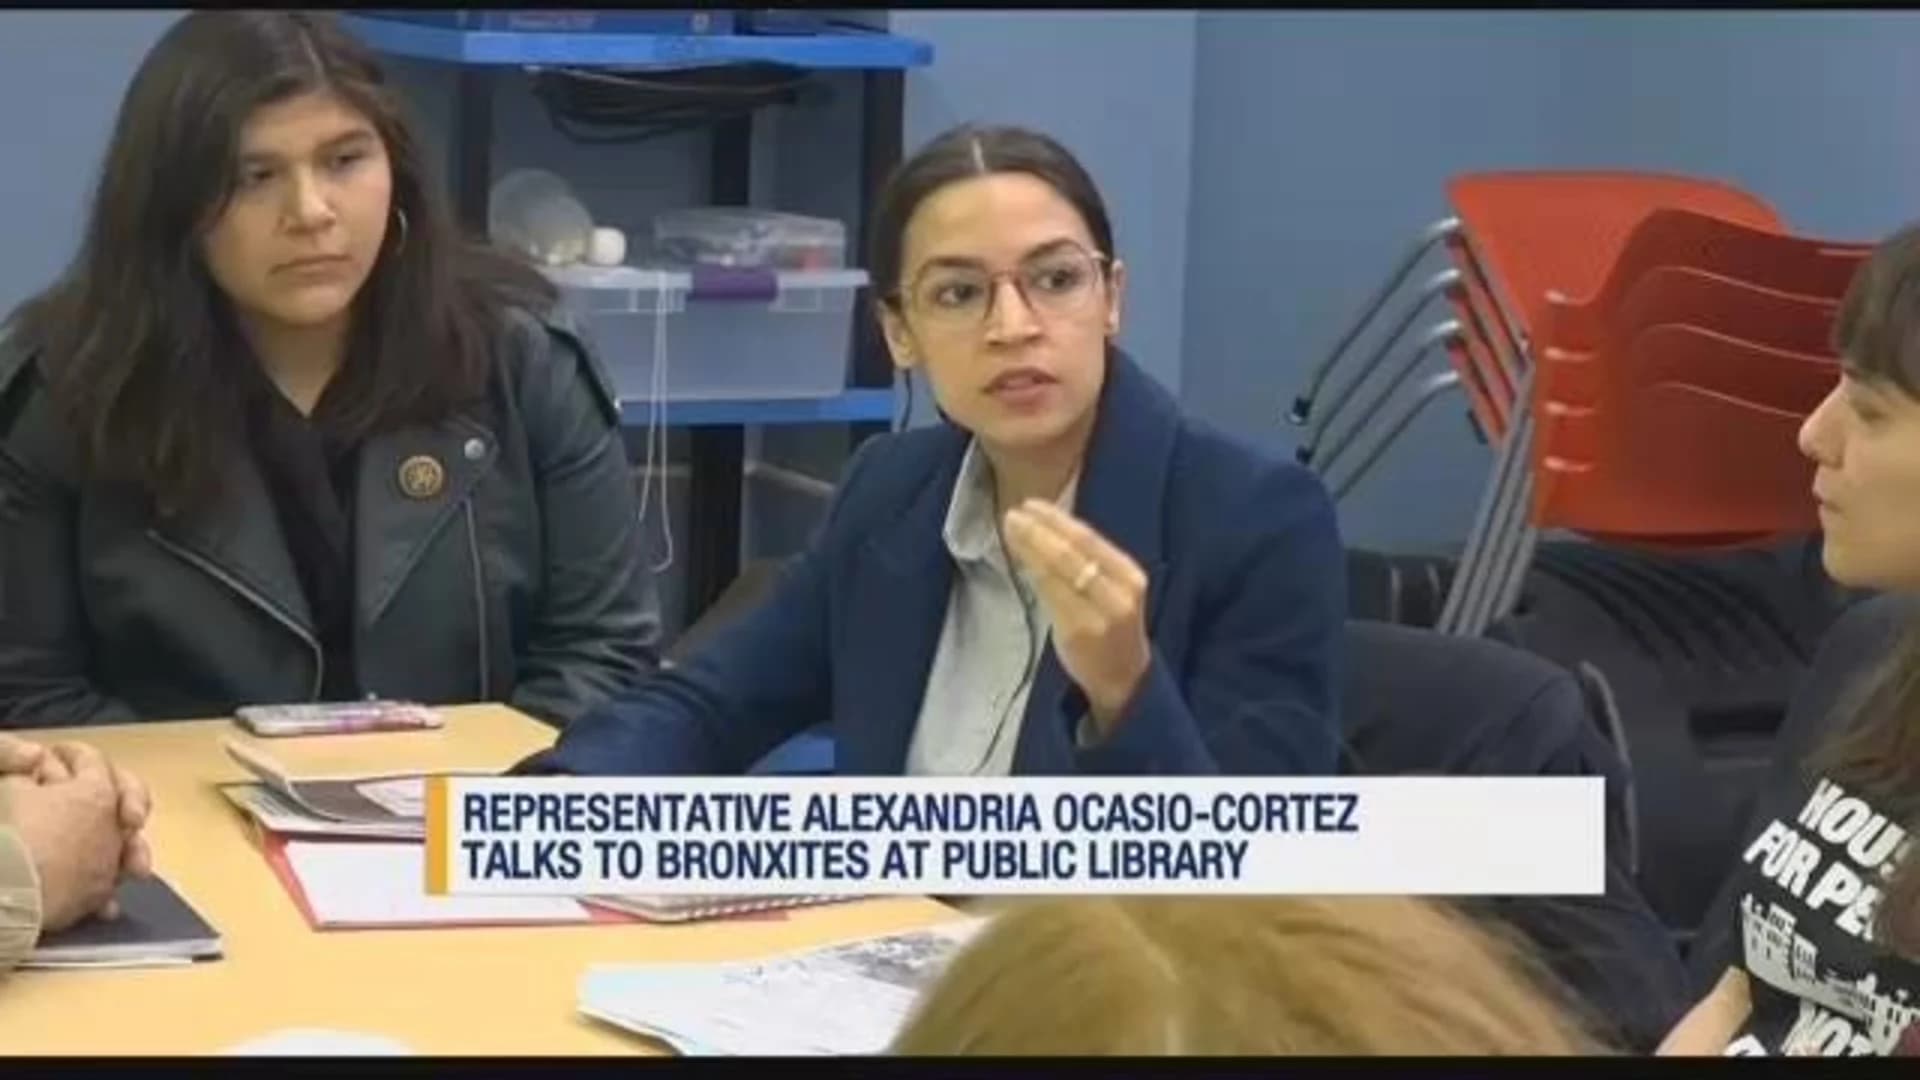 Rep. Ocasio-Cortez goes mobile, urges action to address Bronx housing woes